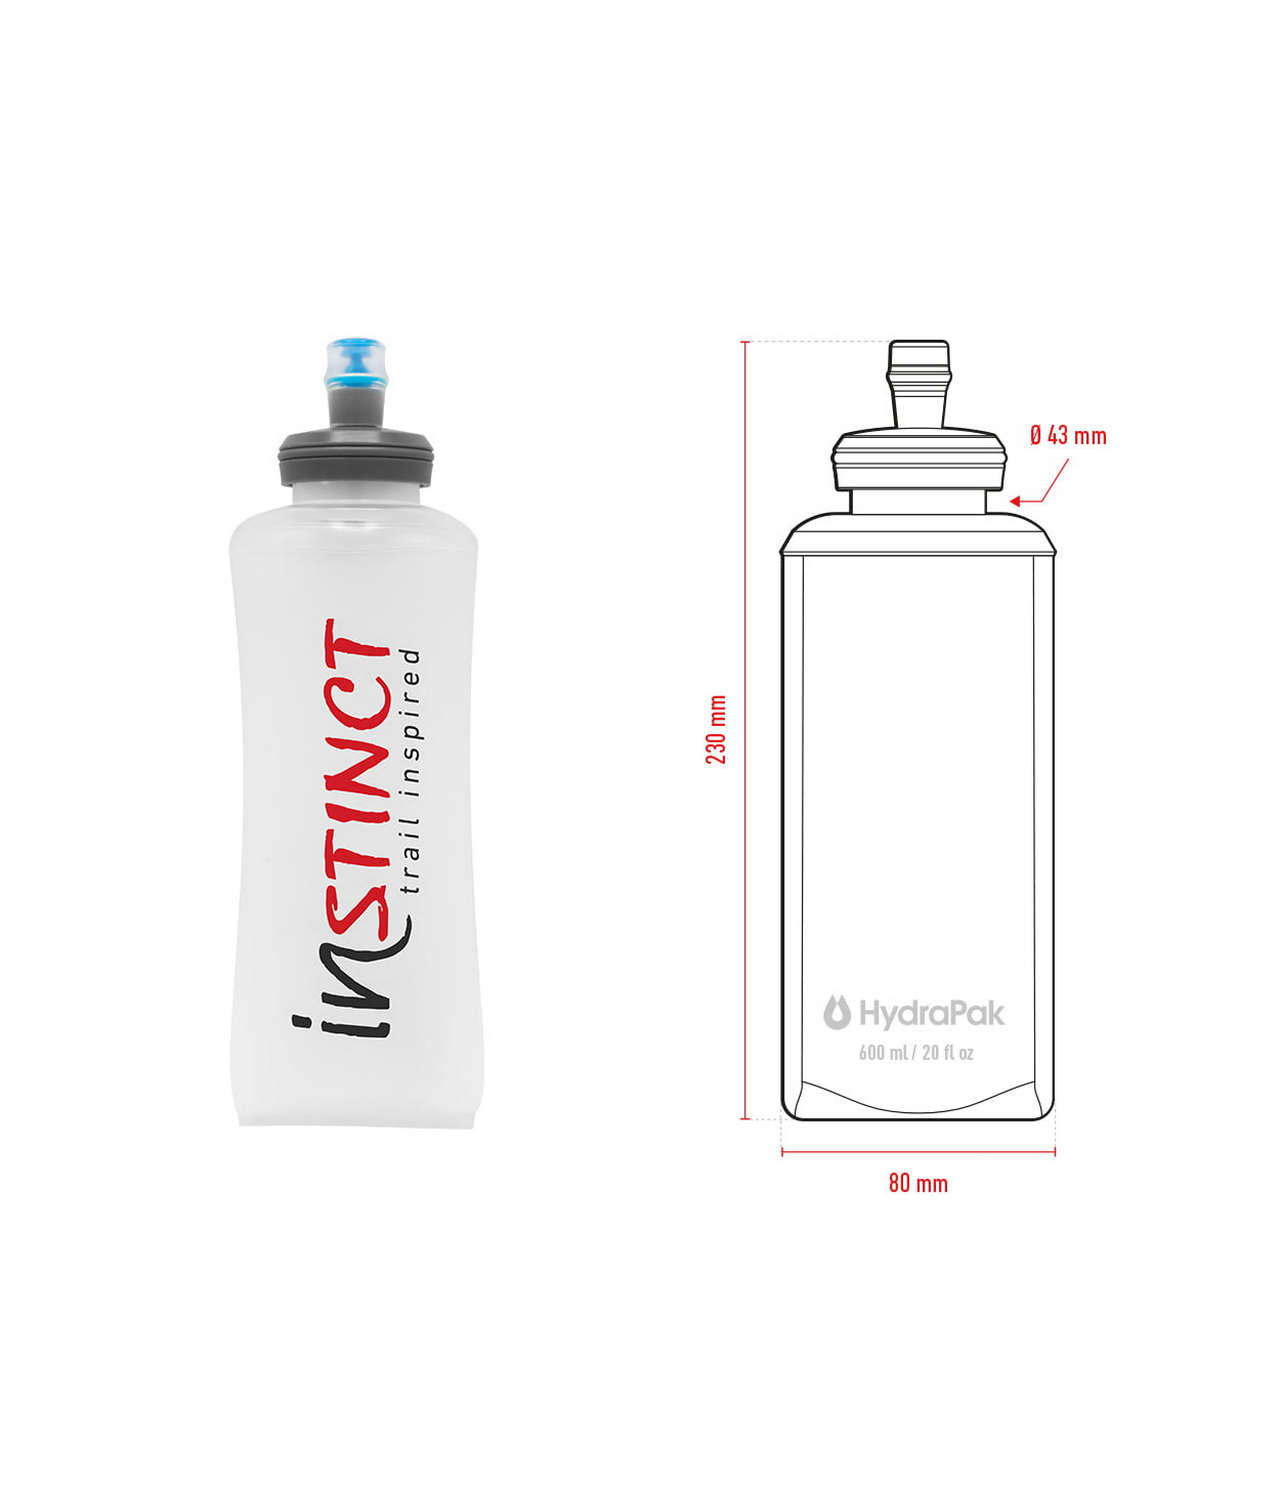 InStinct Hydracell 600ml Dimensions Fast and Light CH 3